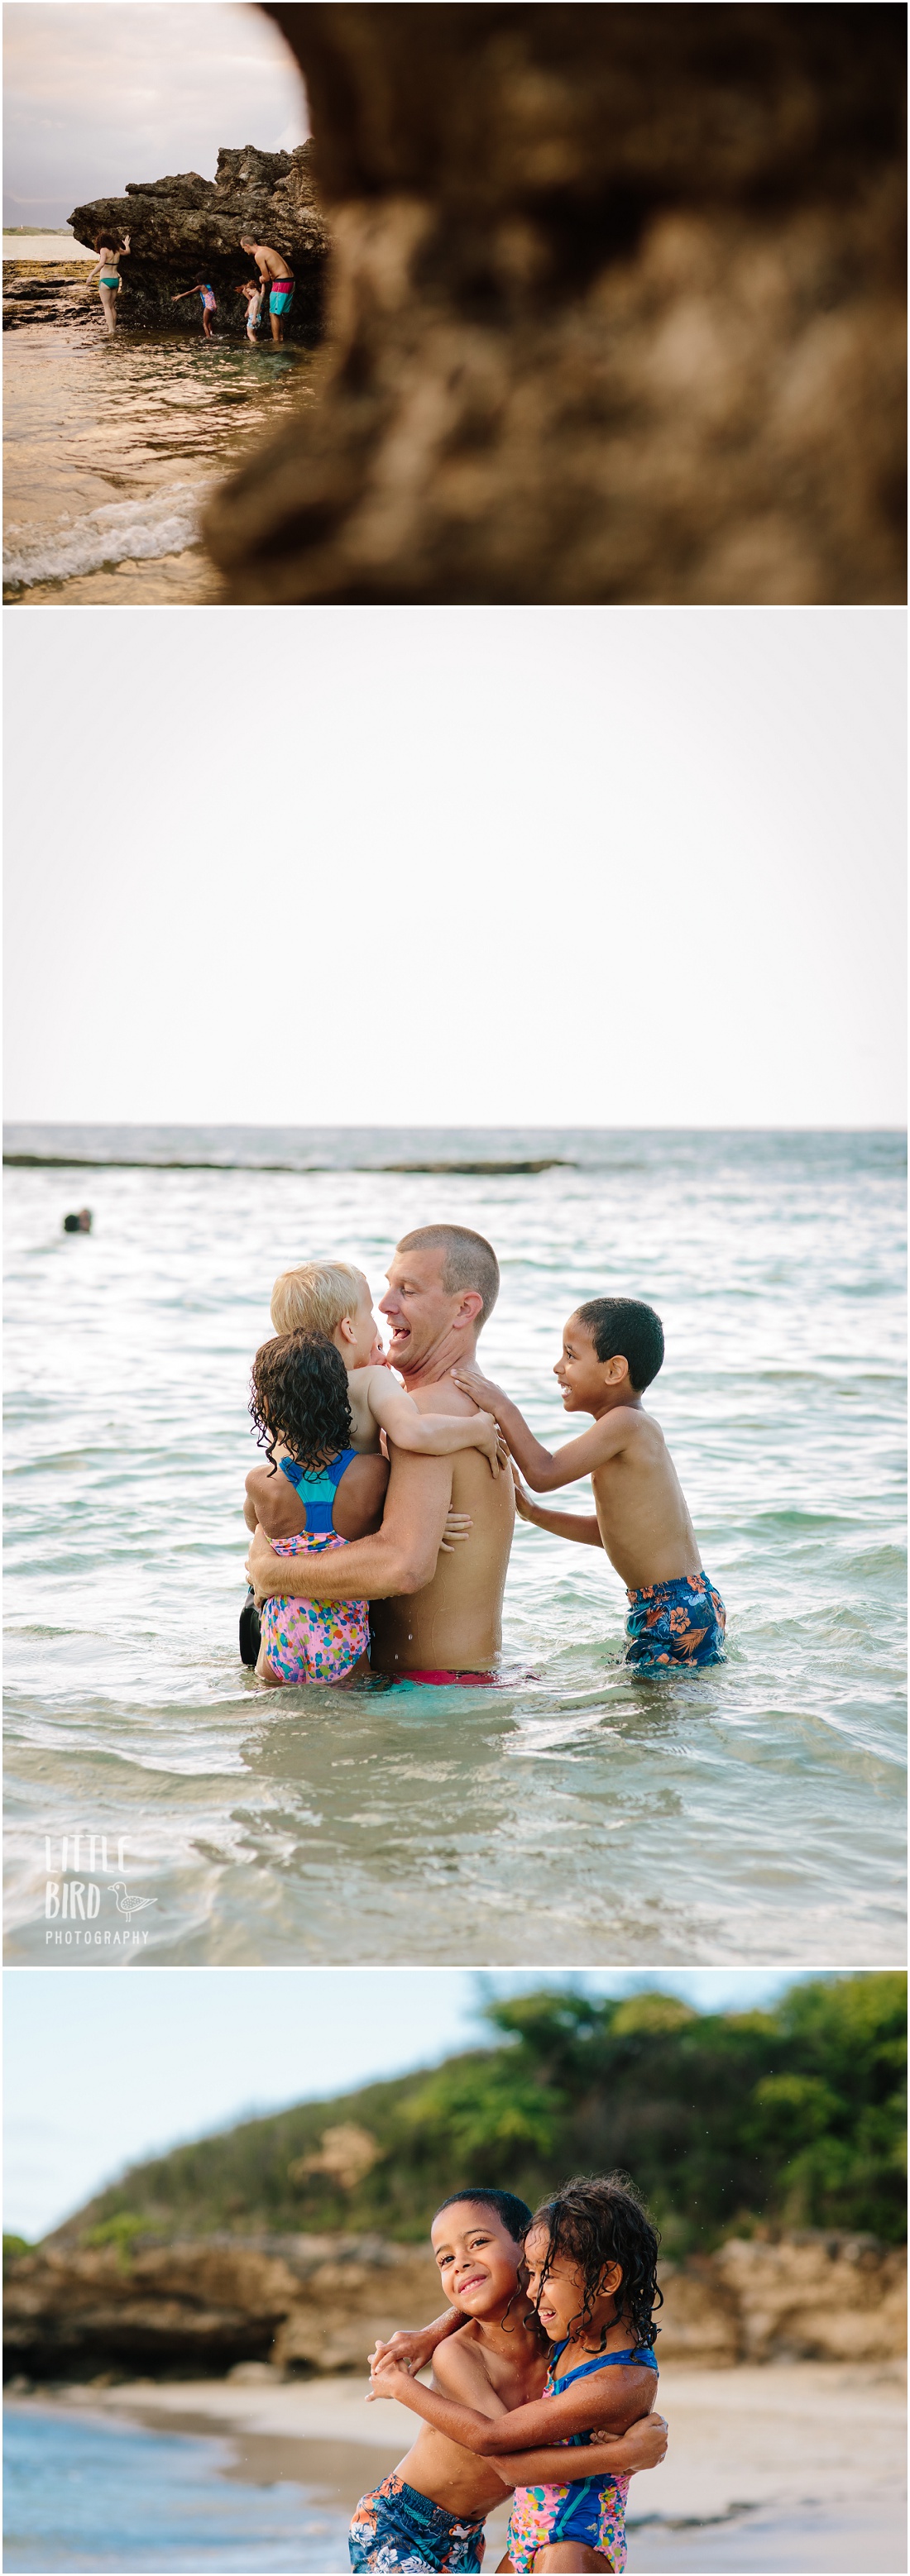 family playing in the ocean in hawaii